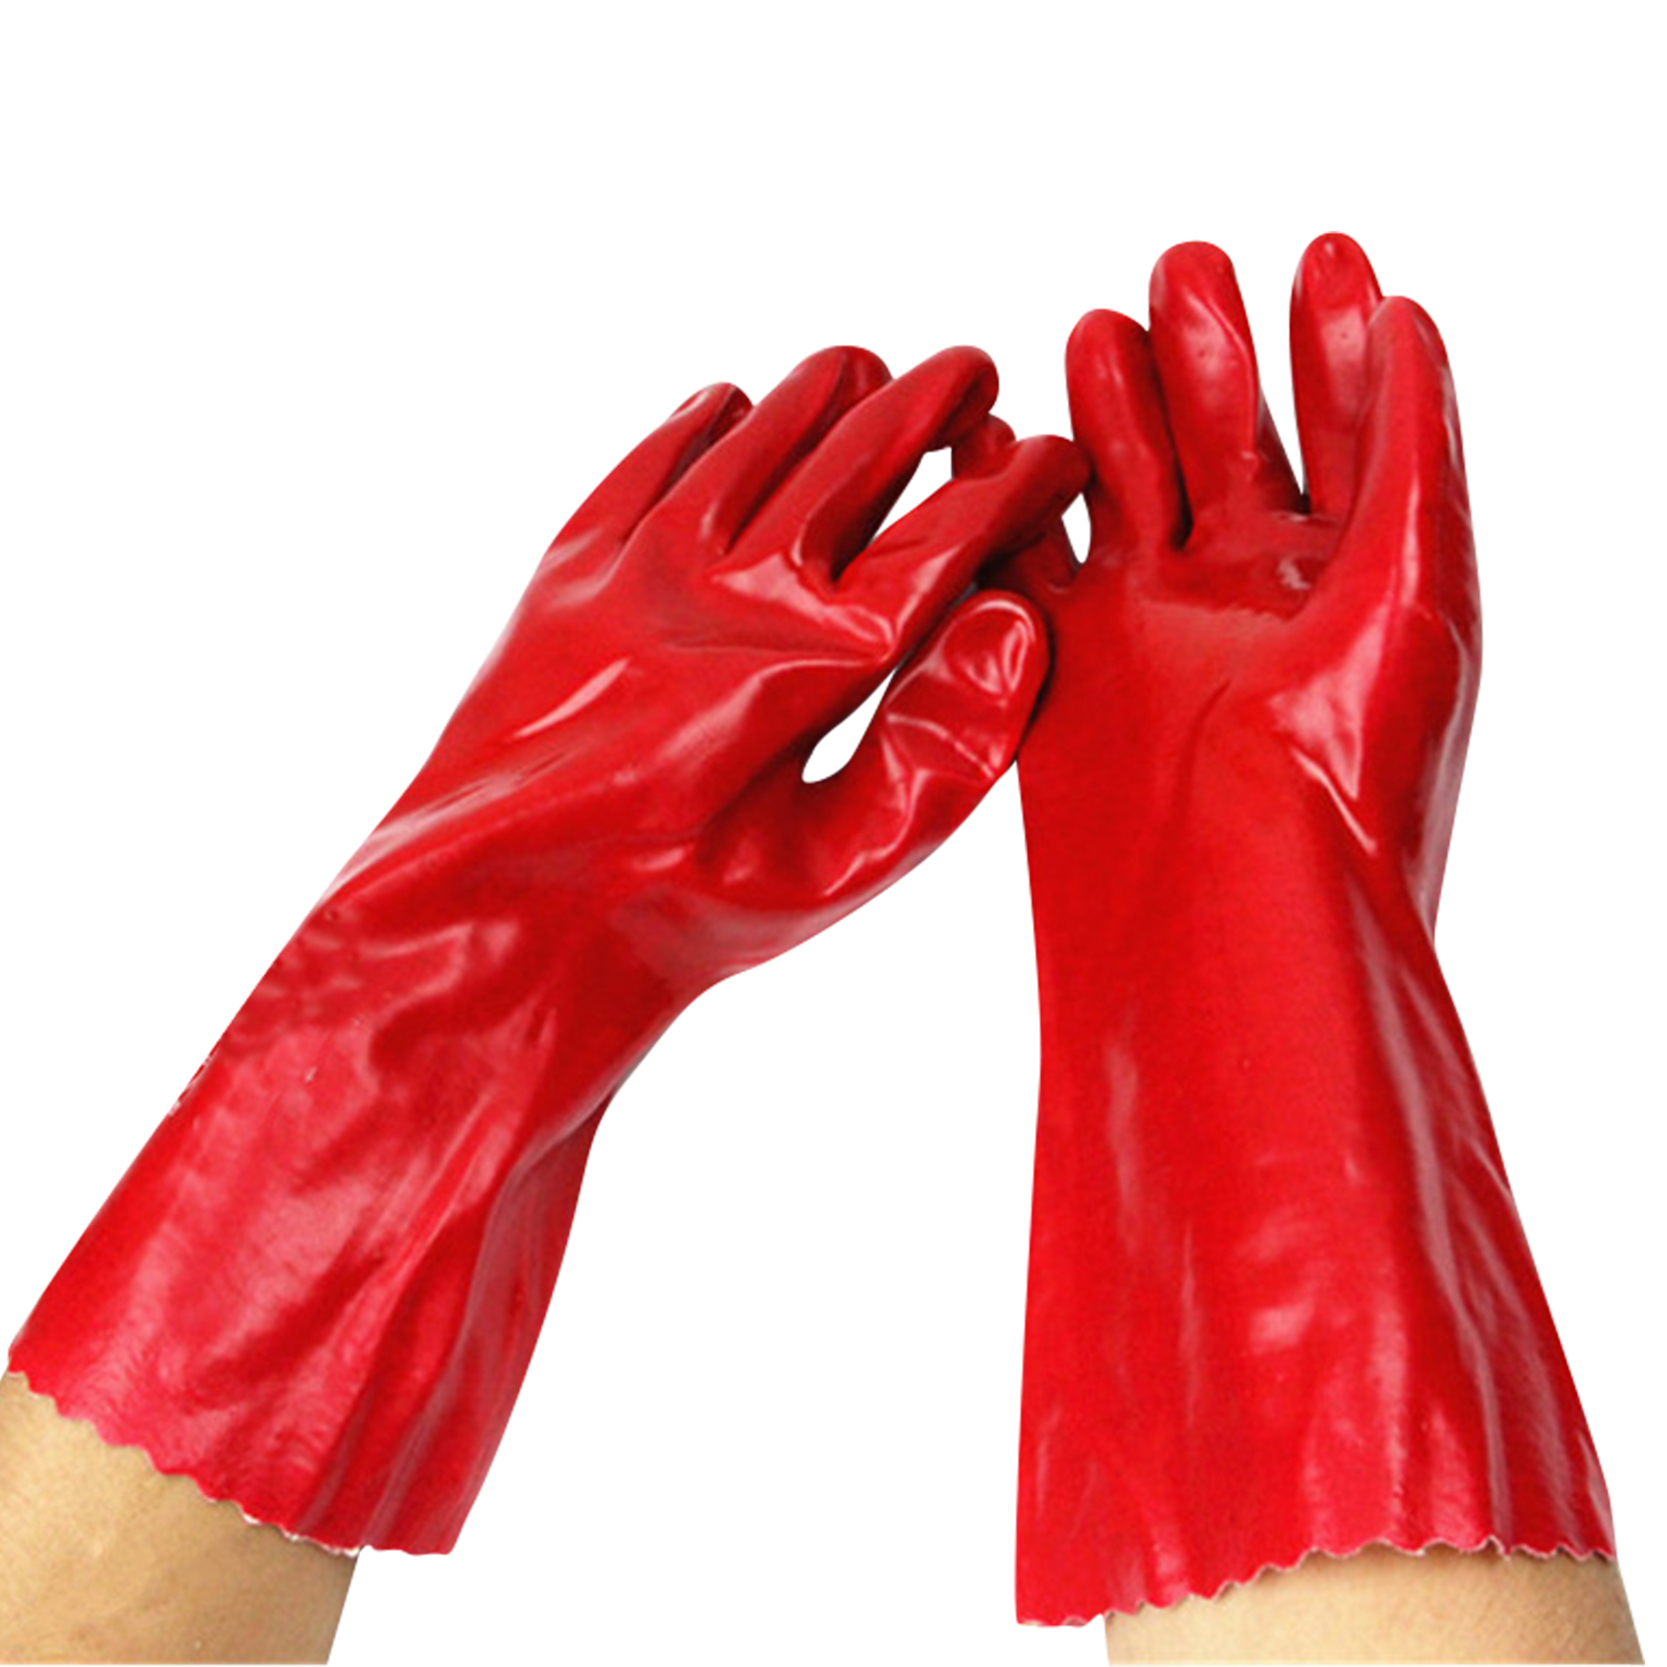 Pvc Industrial Coating Work Hand Glove Suppliers From China (2)